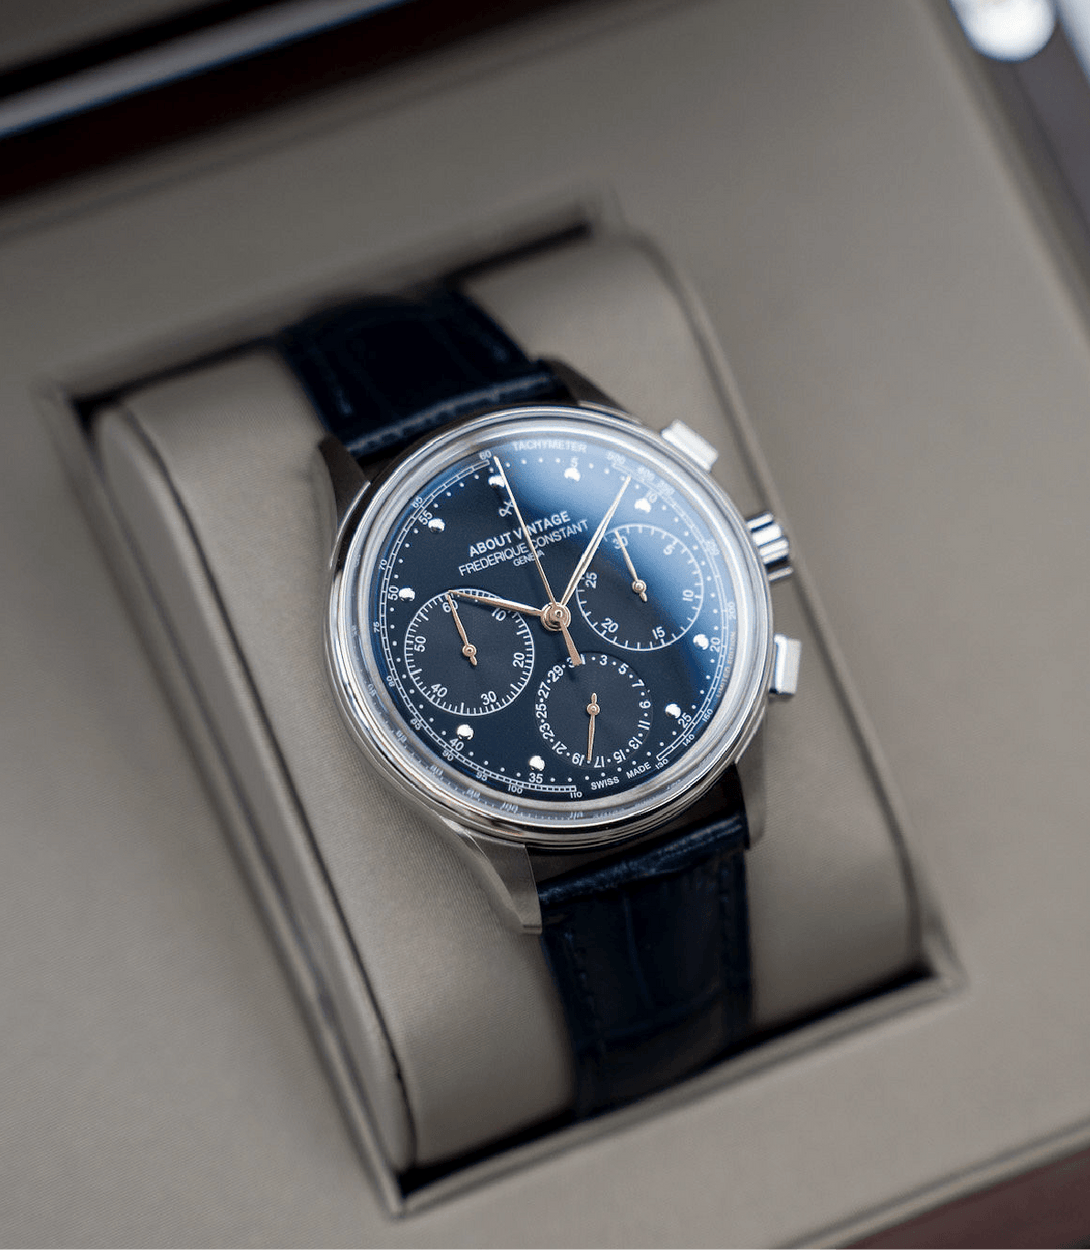 About Vintage 1988 Flyback Chronograph 限量版飛返時計 - Hourglass Watch Store